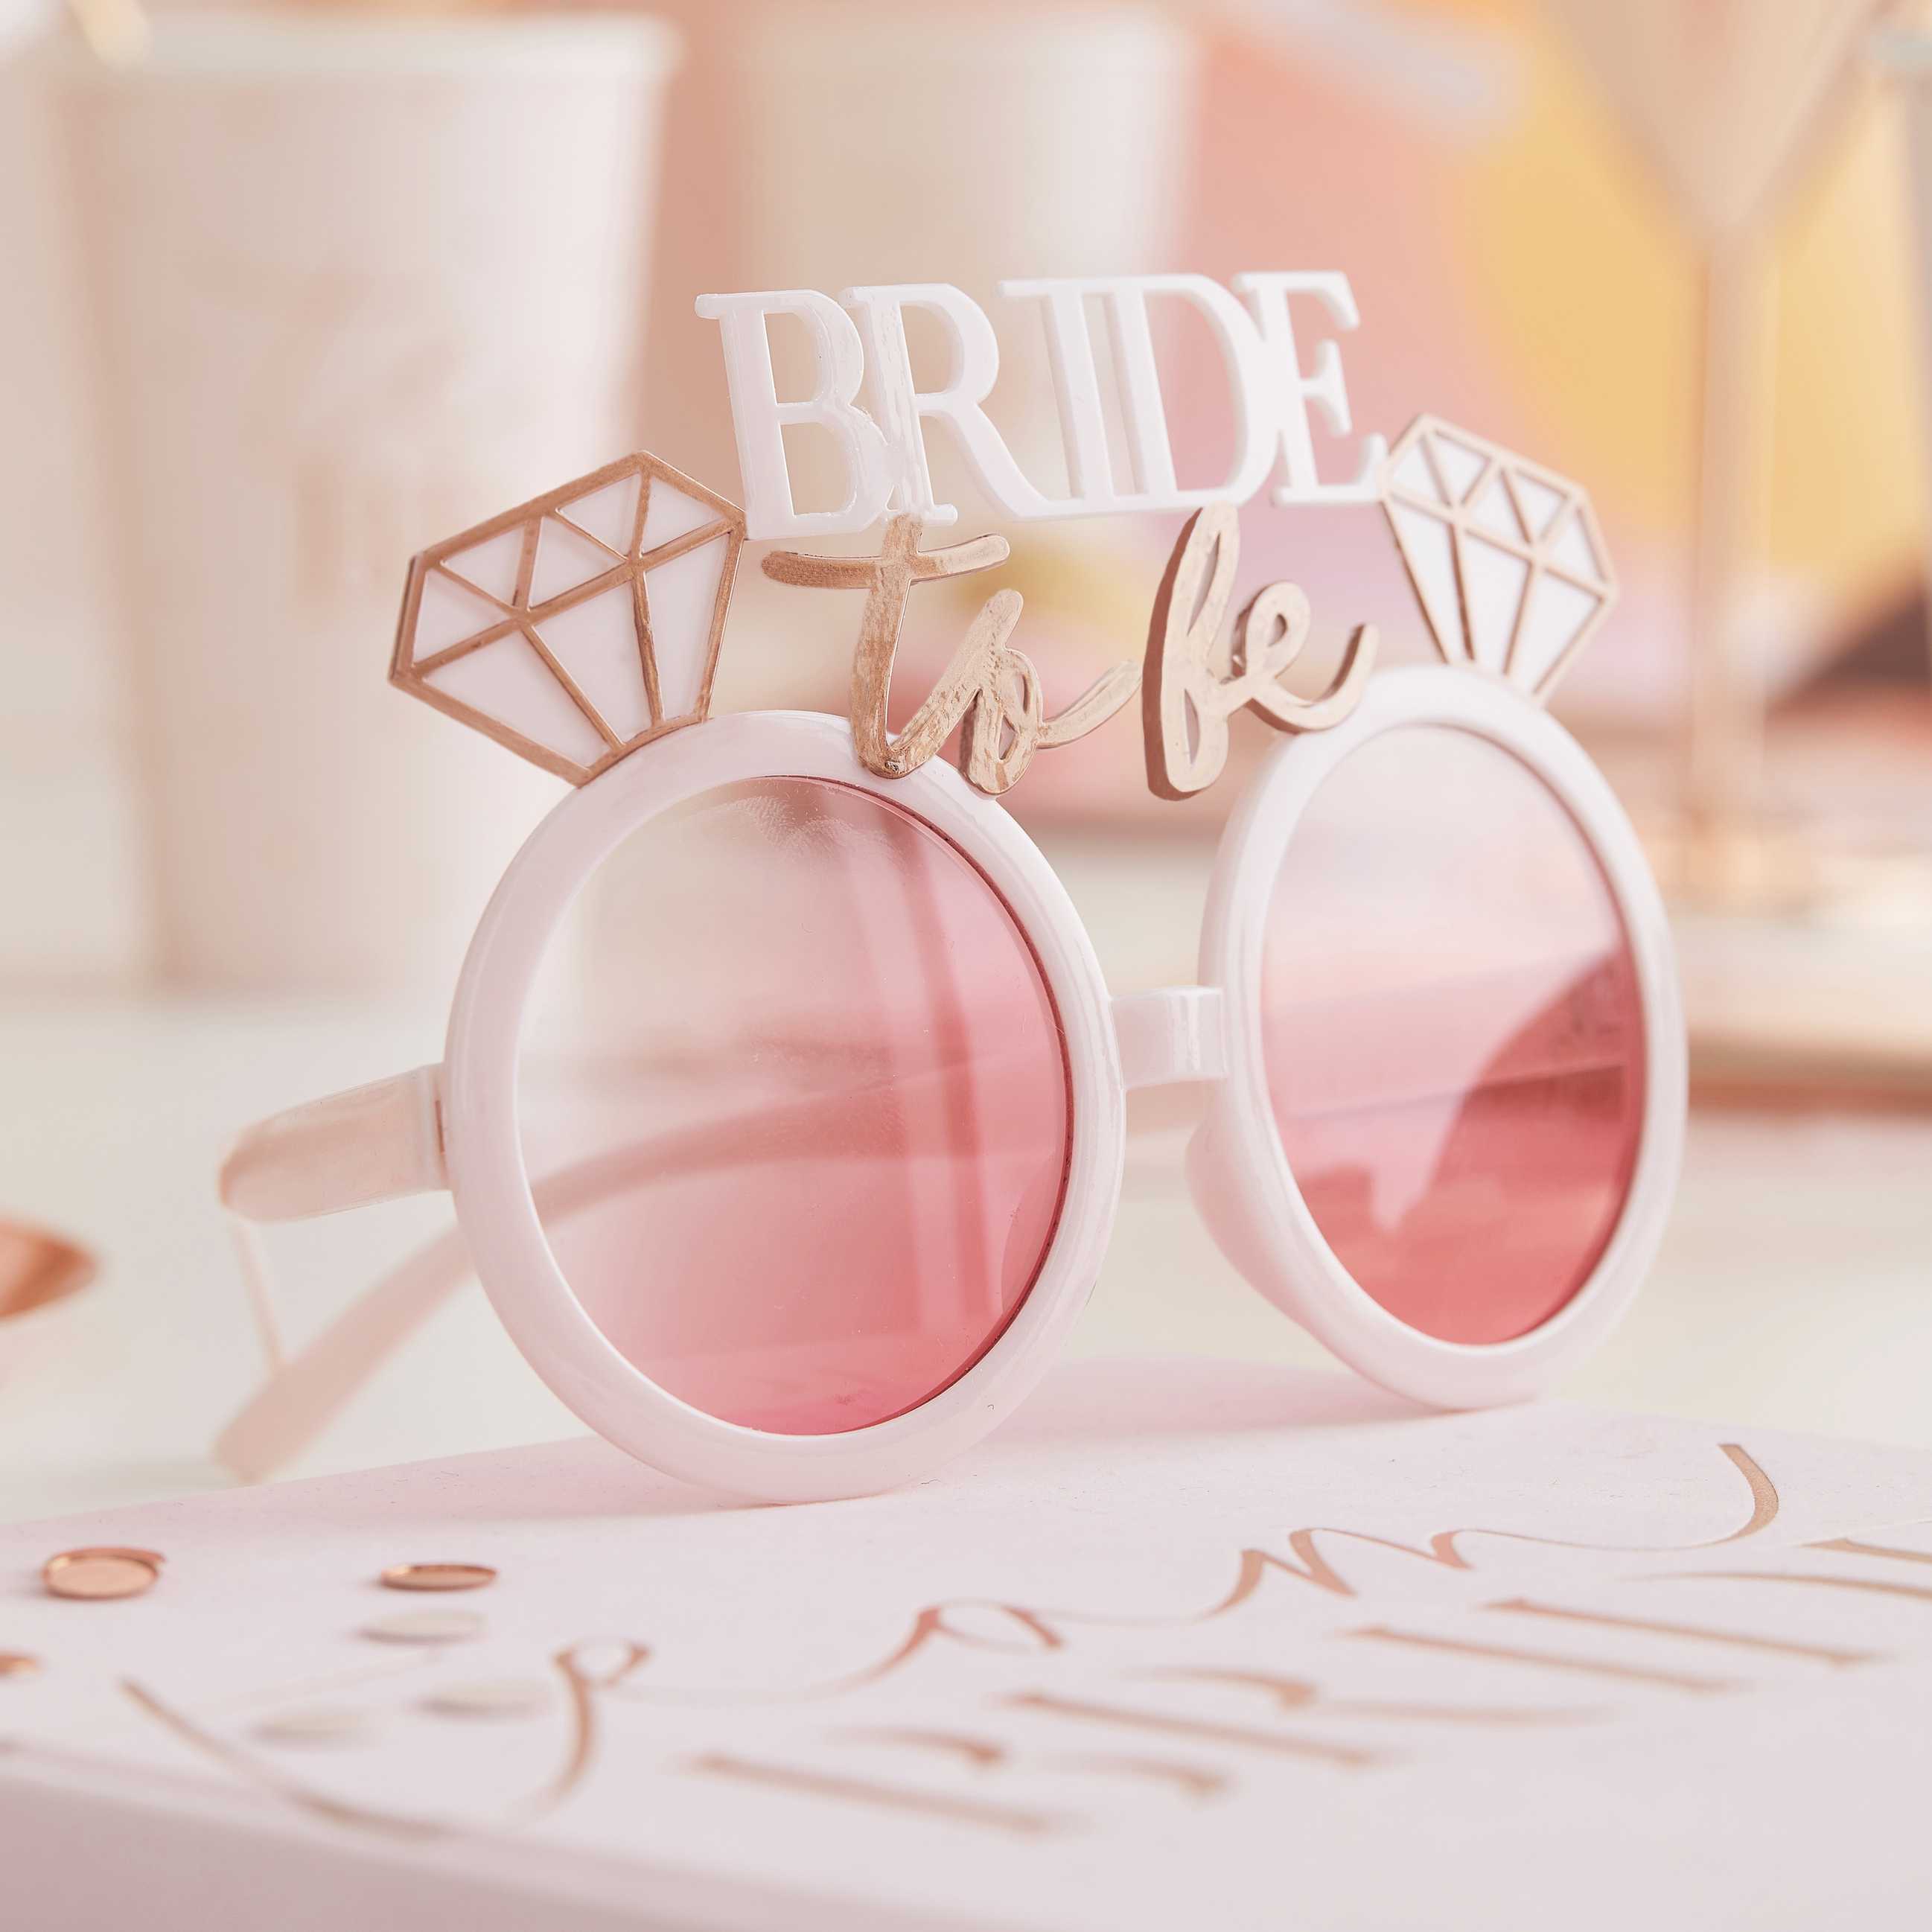 Bride-to-Be Glasses